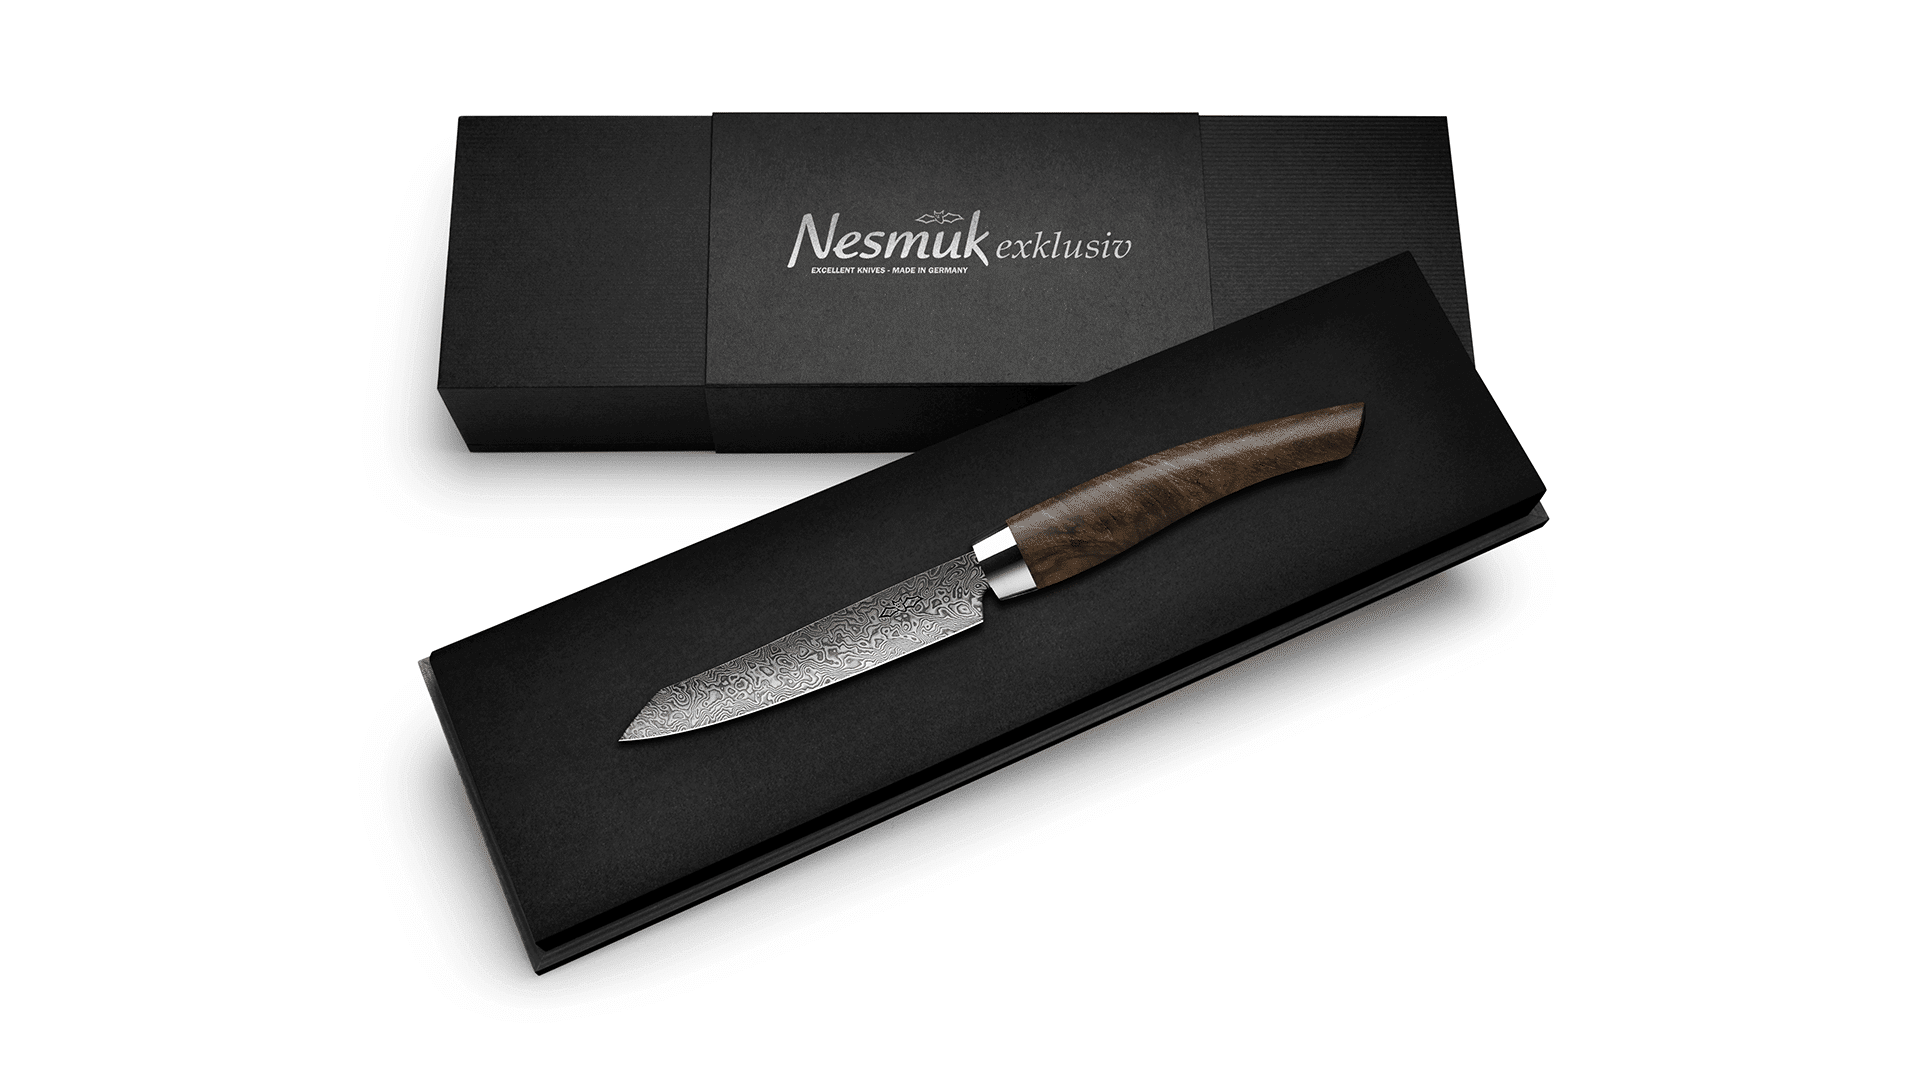 nesmuk-exclusive-c90-office-knife-walnut-wood-from-solingen-noble-packaging